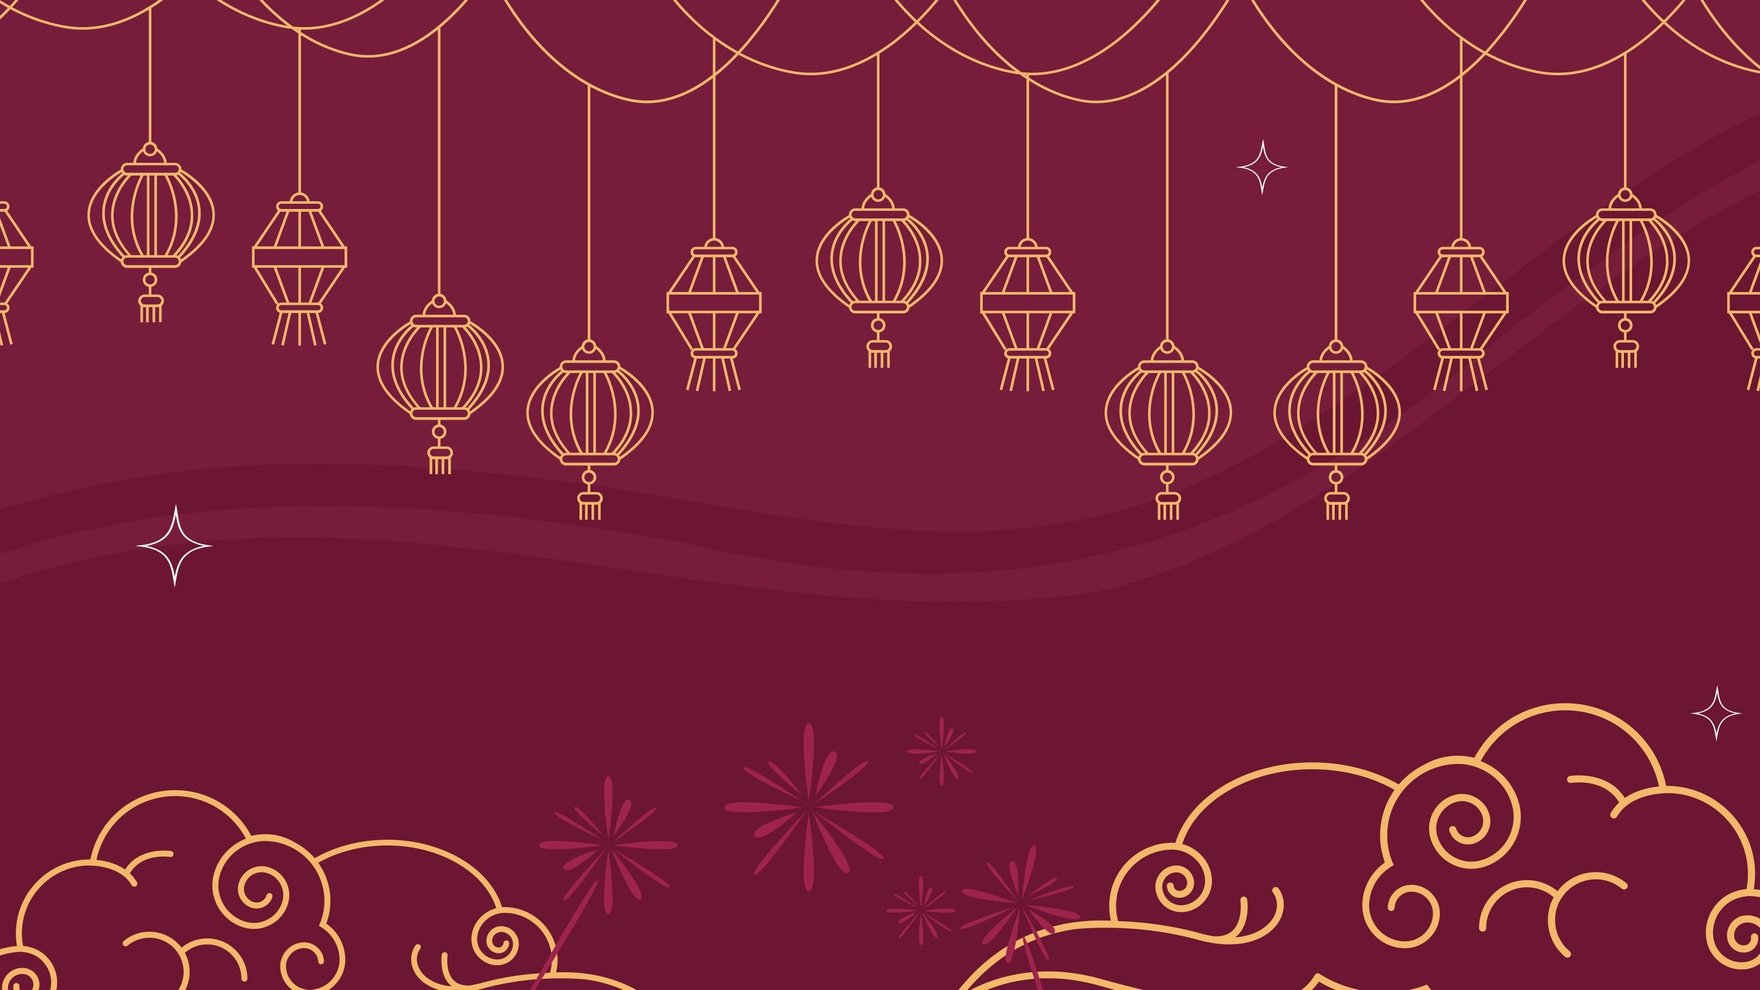 Chinese New Year Drawing Background in PDF, Illustrator, PSD, EPS, SVG, JPG, PNG